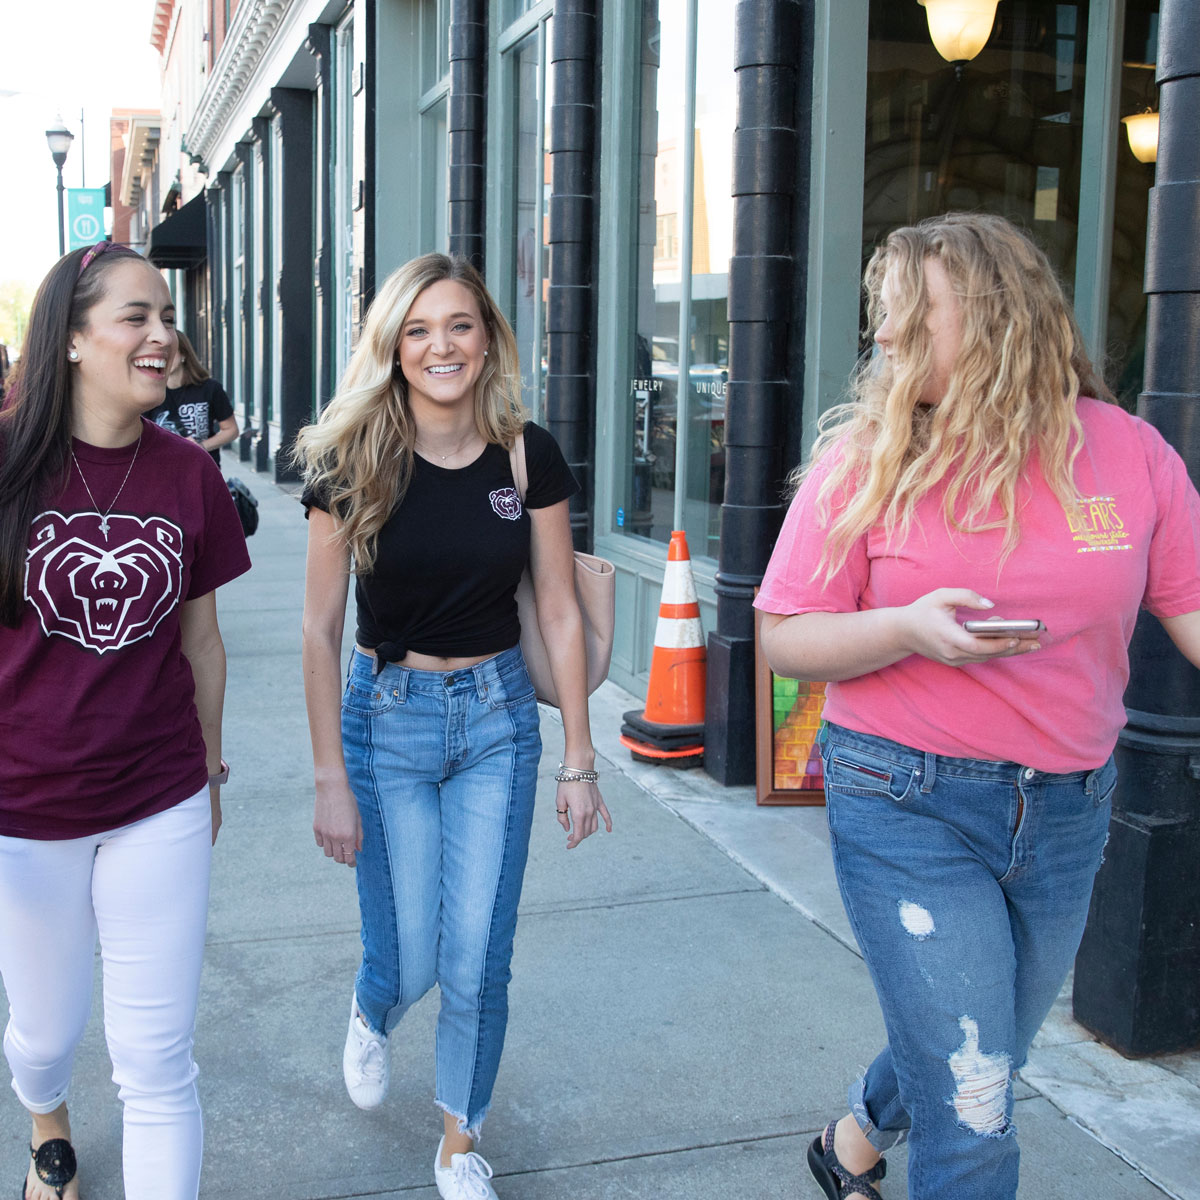 Three female students laugh as they walk downtown.